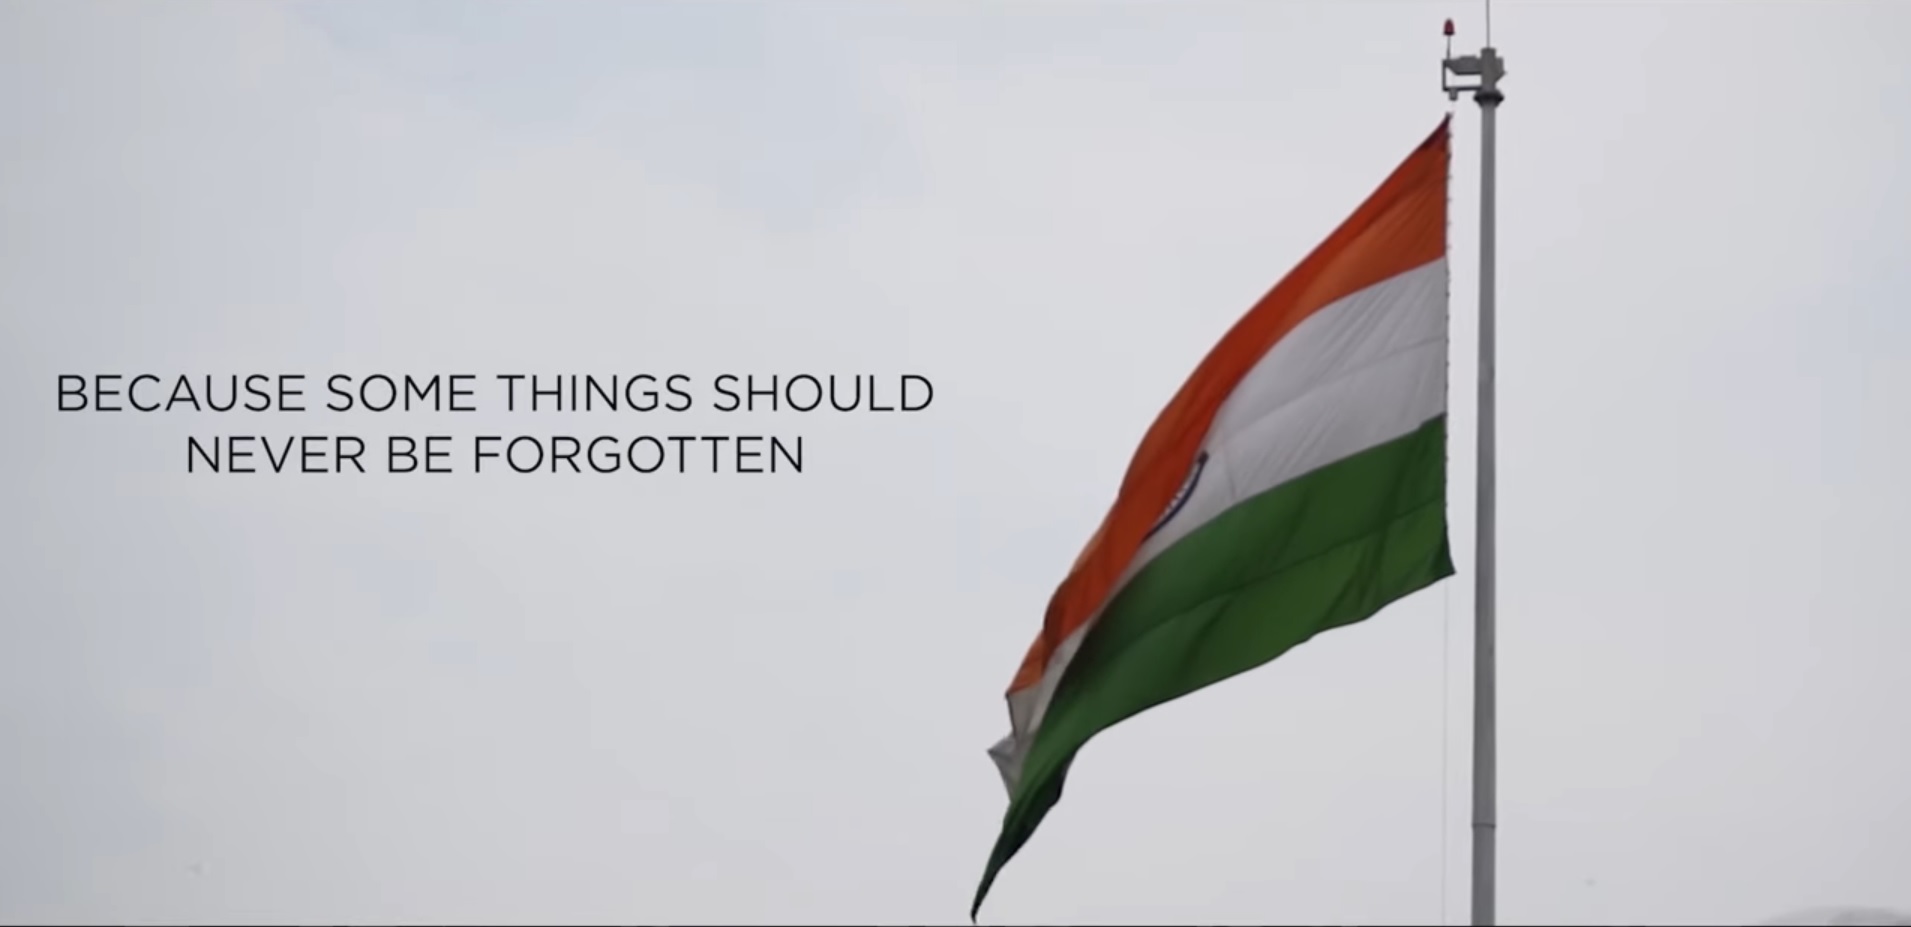 Independence Day 2019: Dalmia Bharat Group Releases 'Saare Jahan Se Accha' in a New Avatar